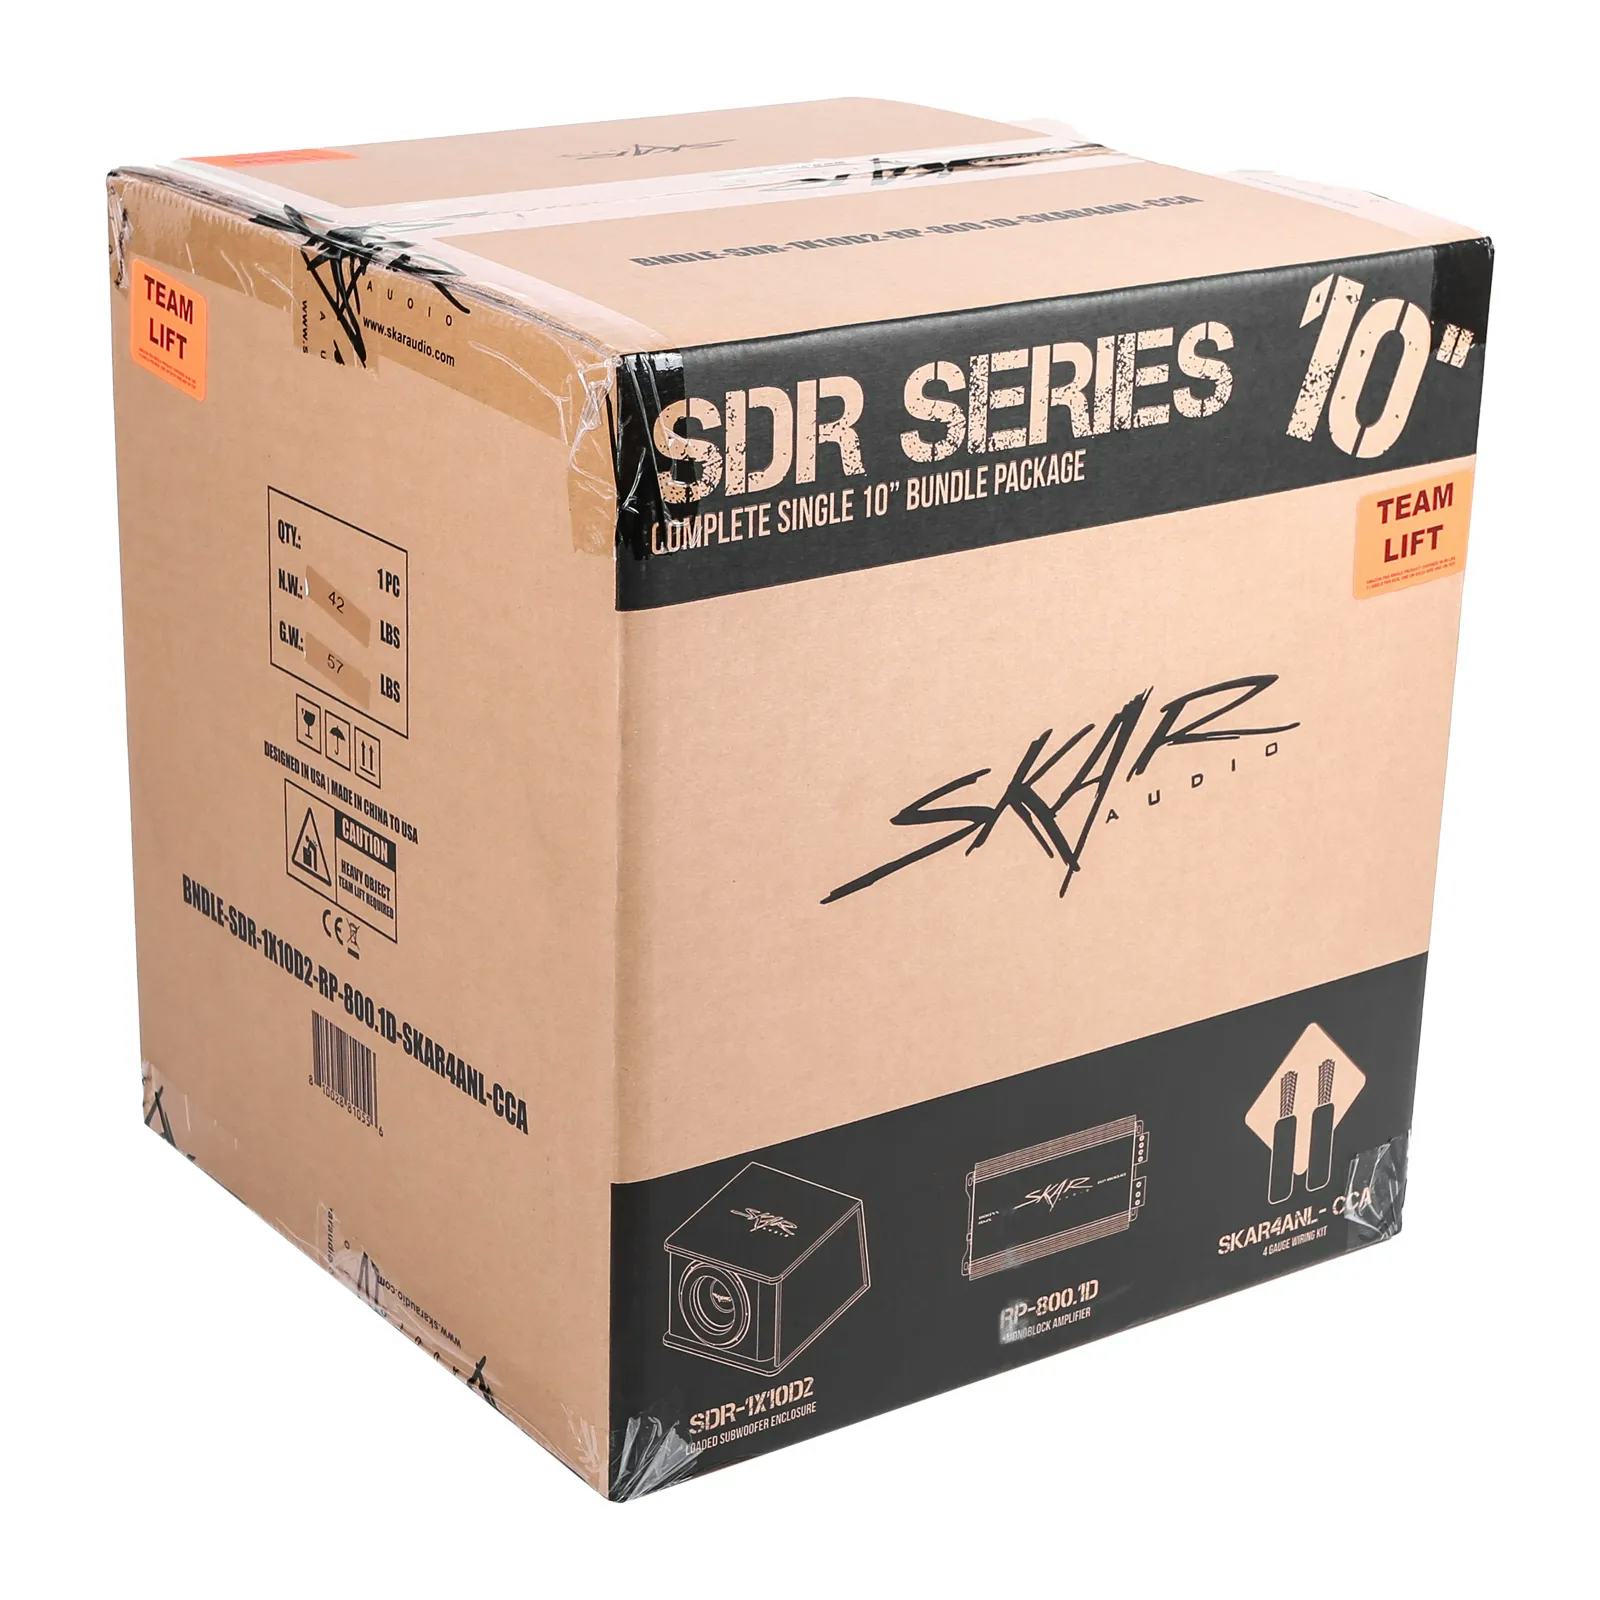 Single 10" 1,200 Watt SDR Series Complete Subwoofer Package with Vented Enclosure and Amplifier #6